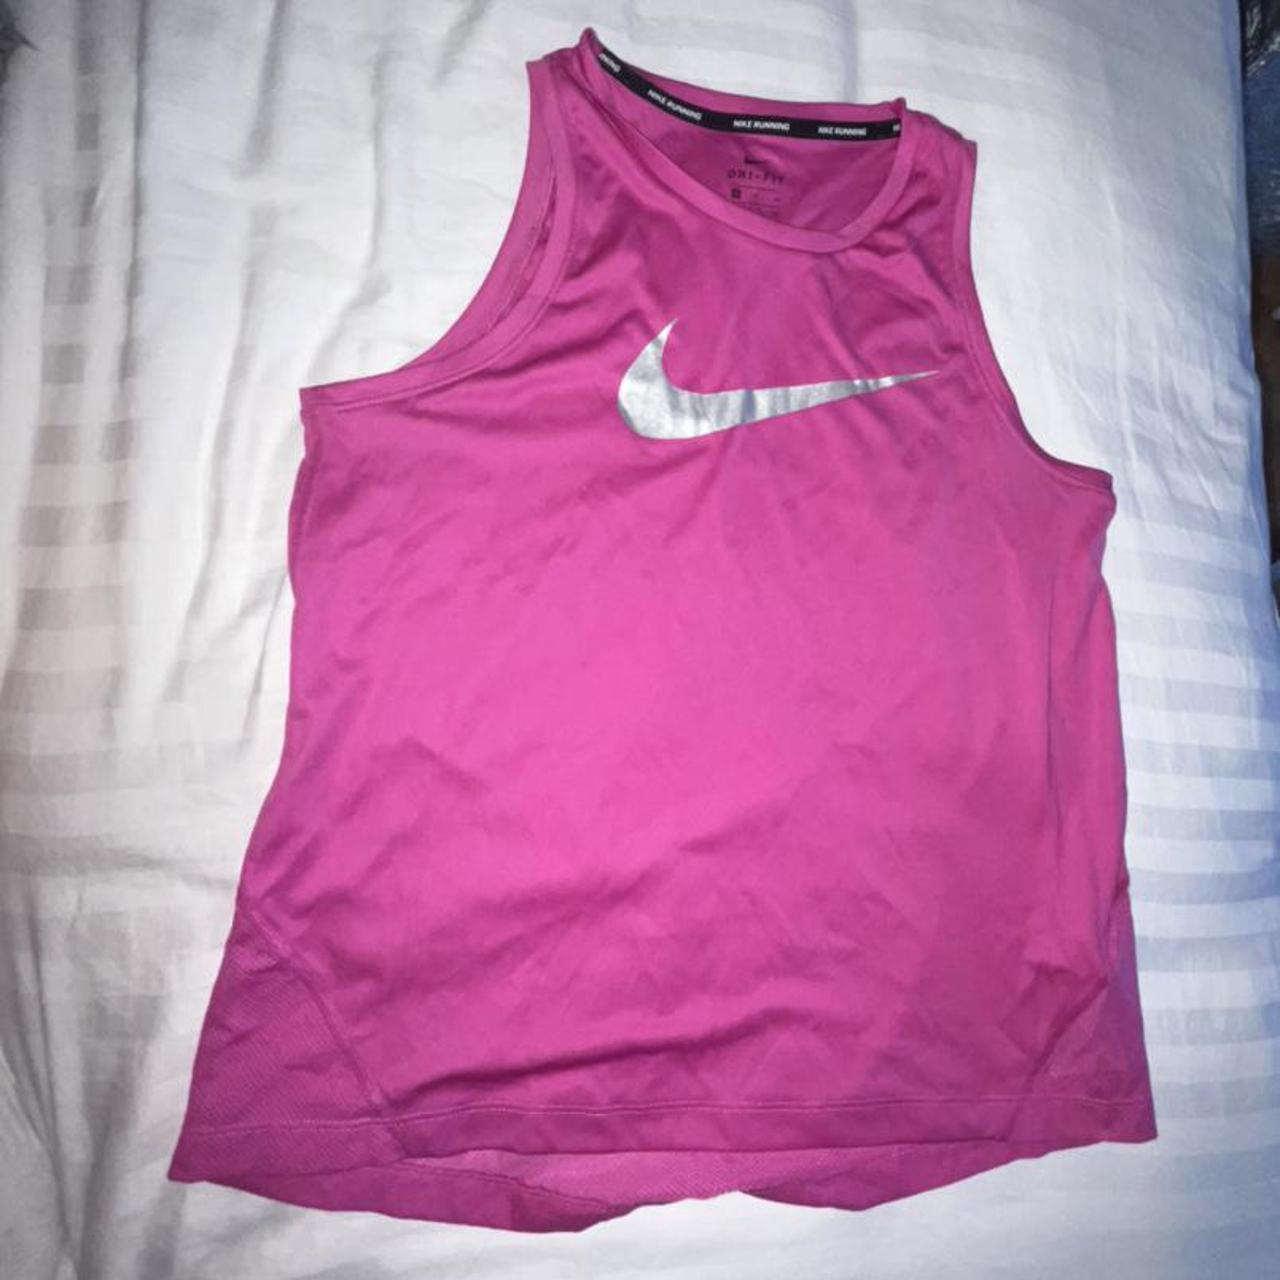 Product Image 2 - Nike tank top in hot